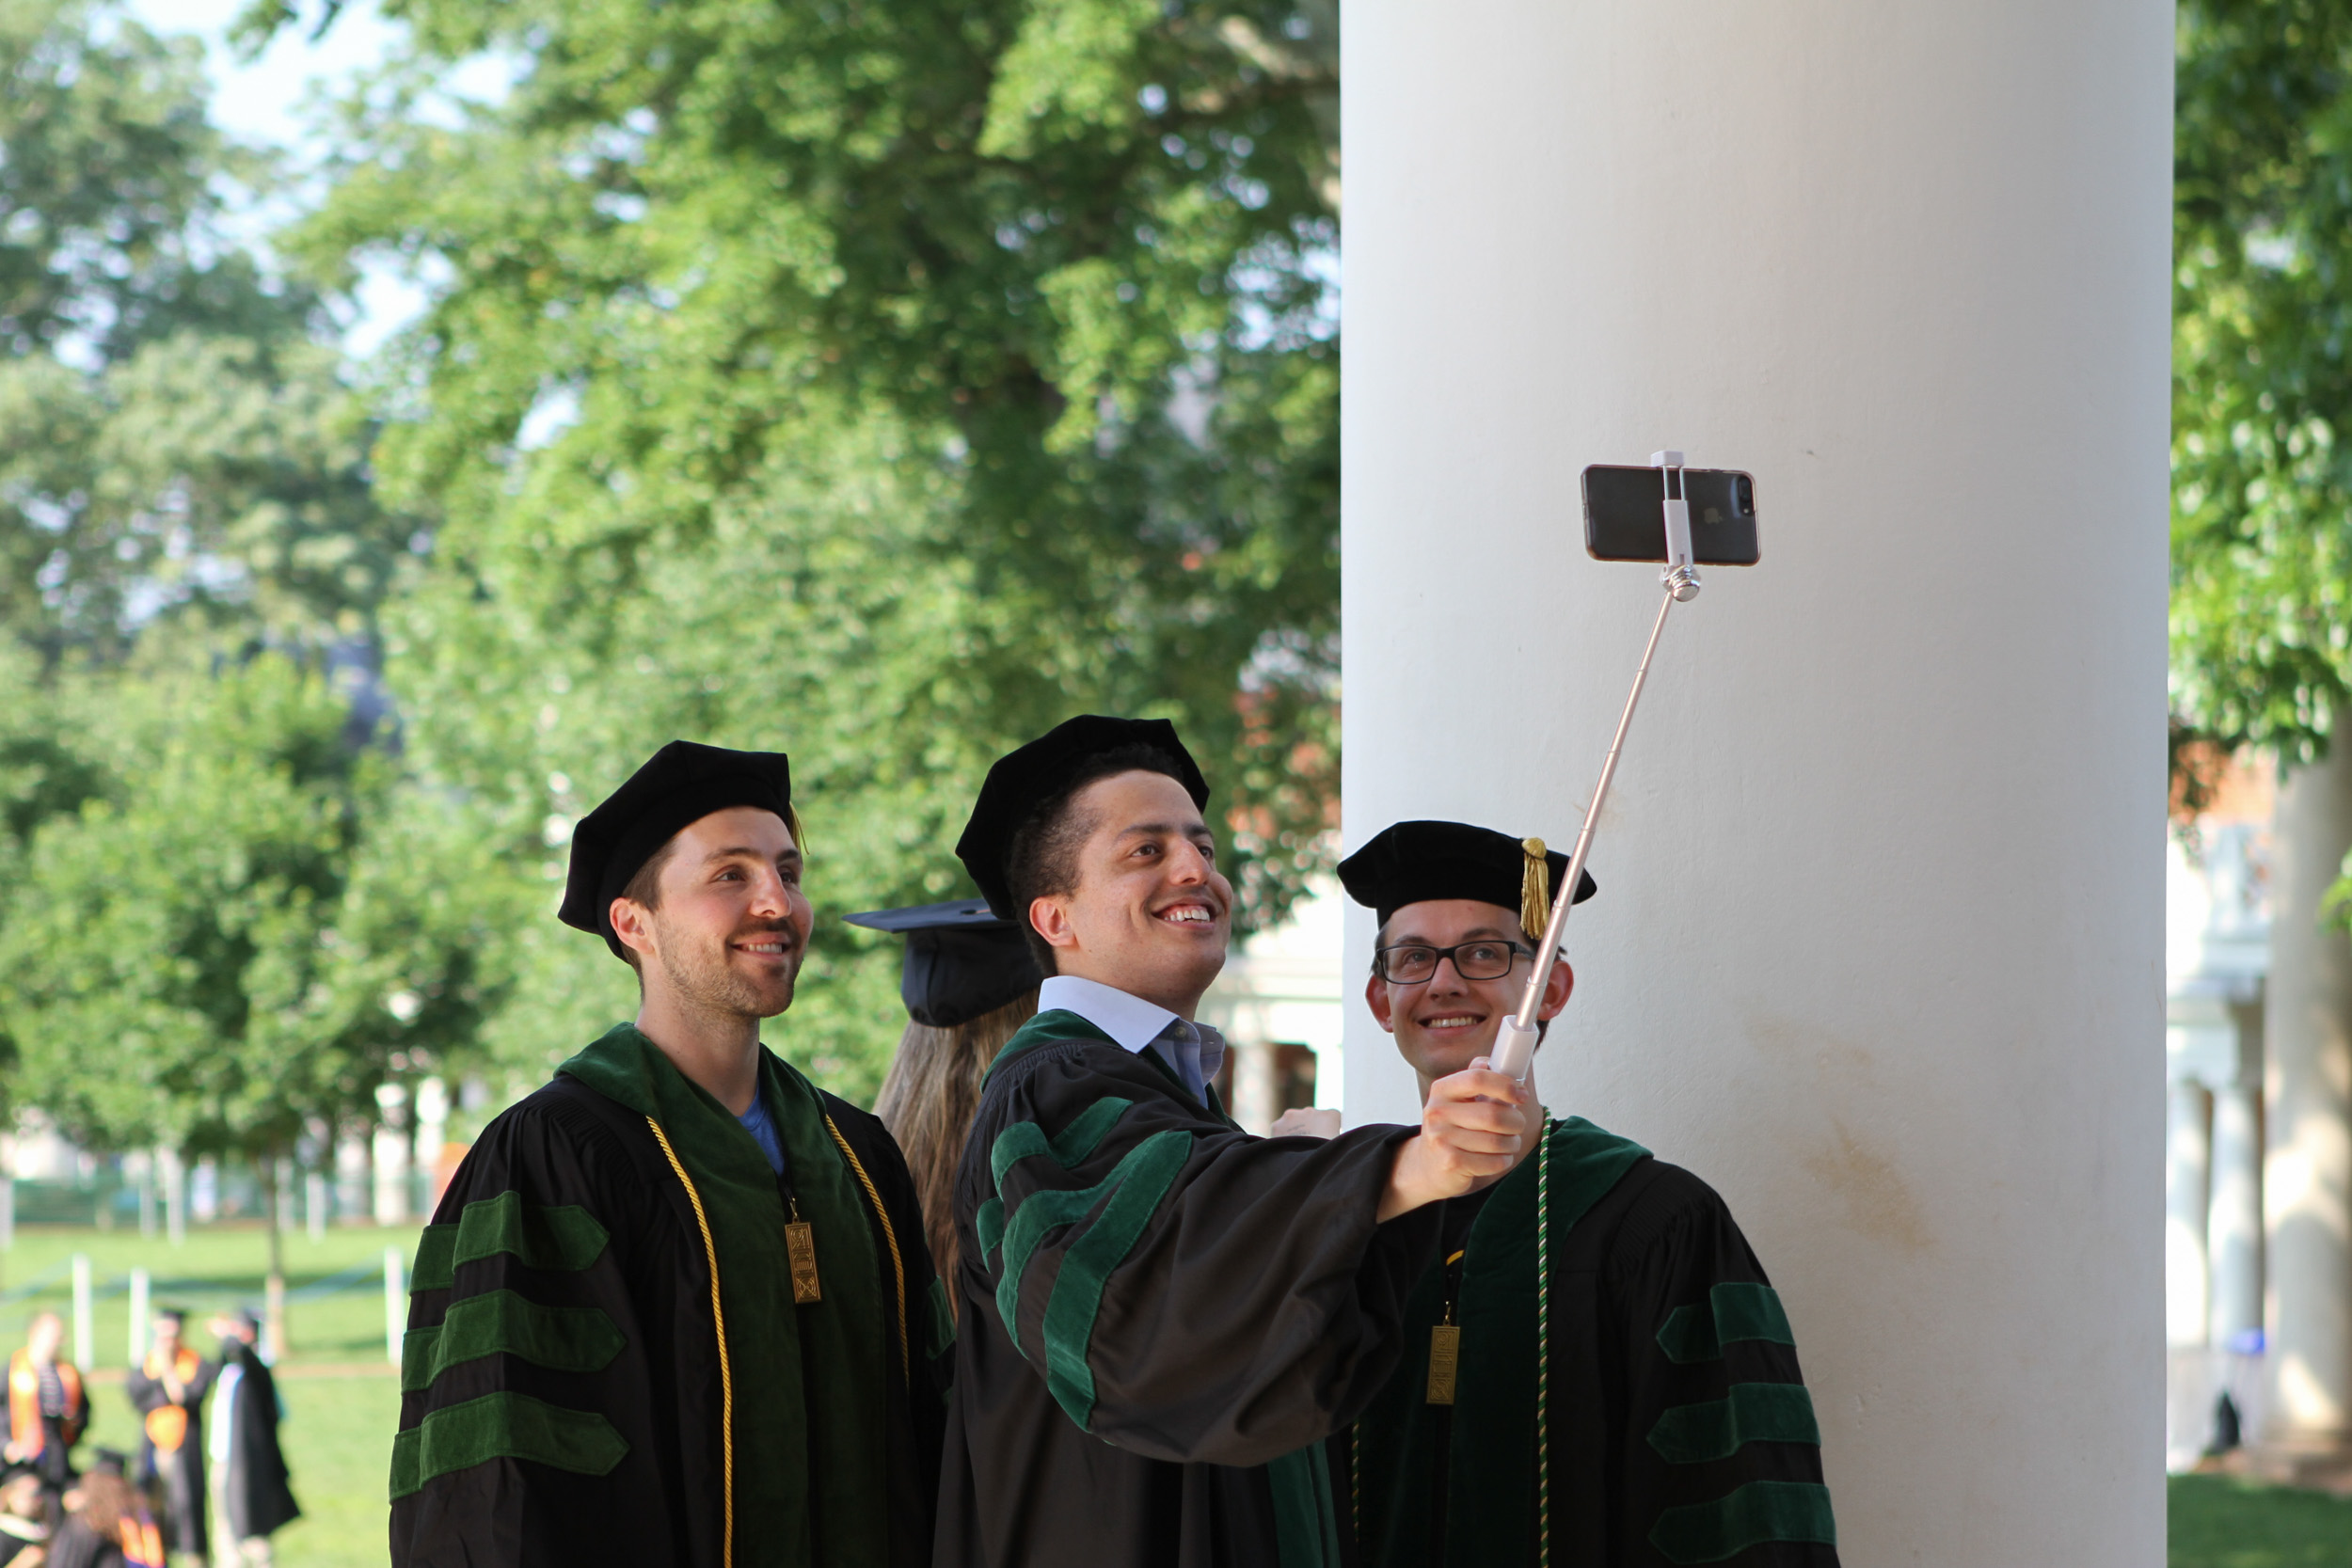 Graduates using a selfie stick for a picture